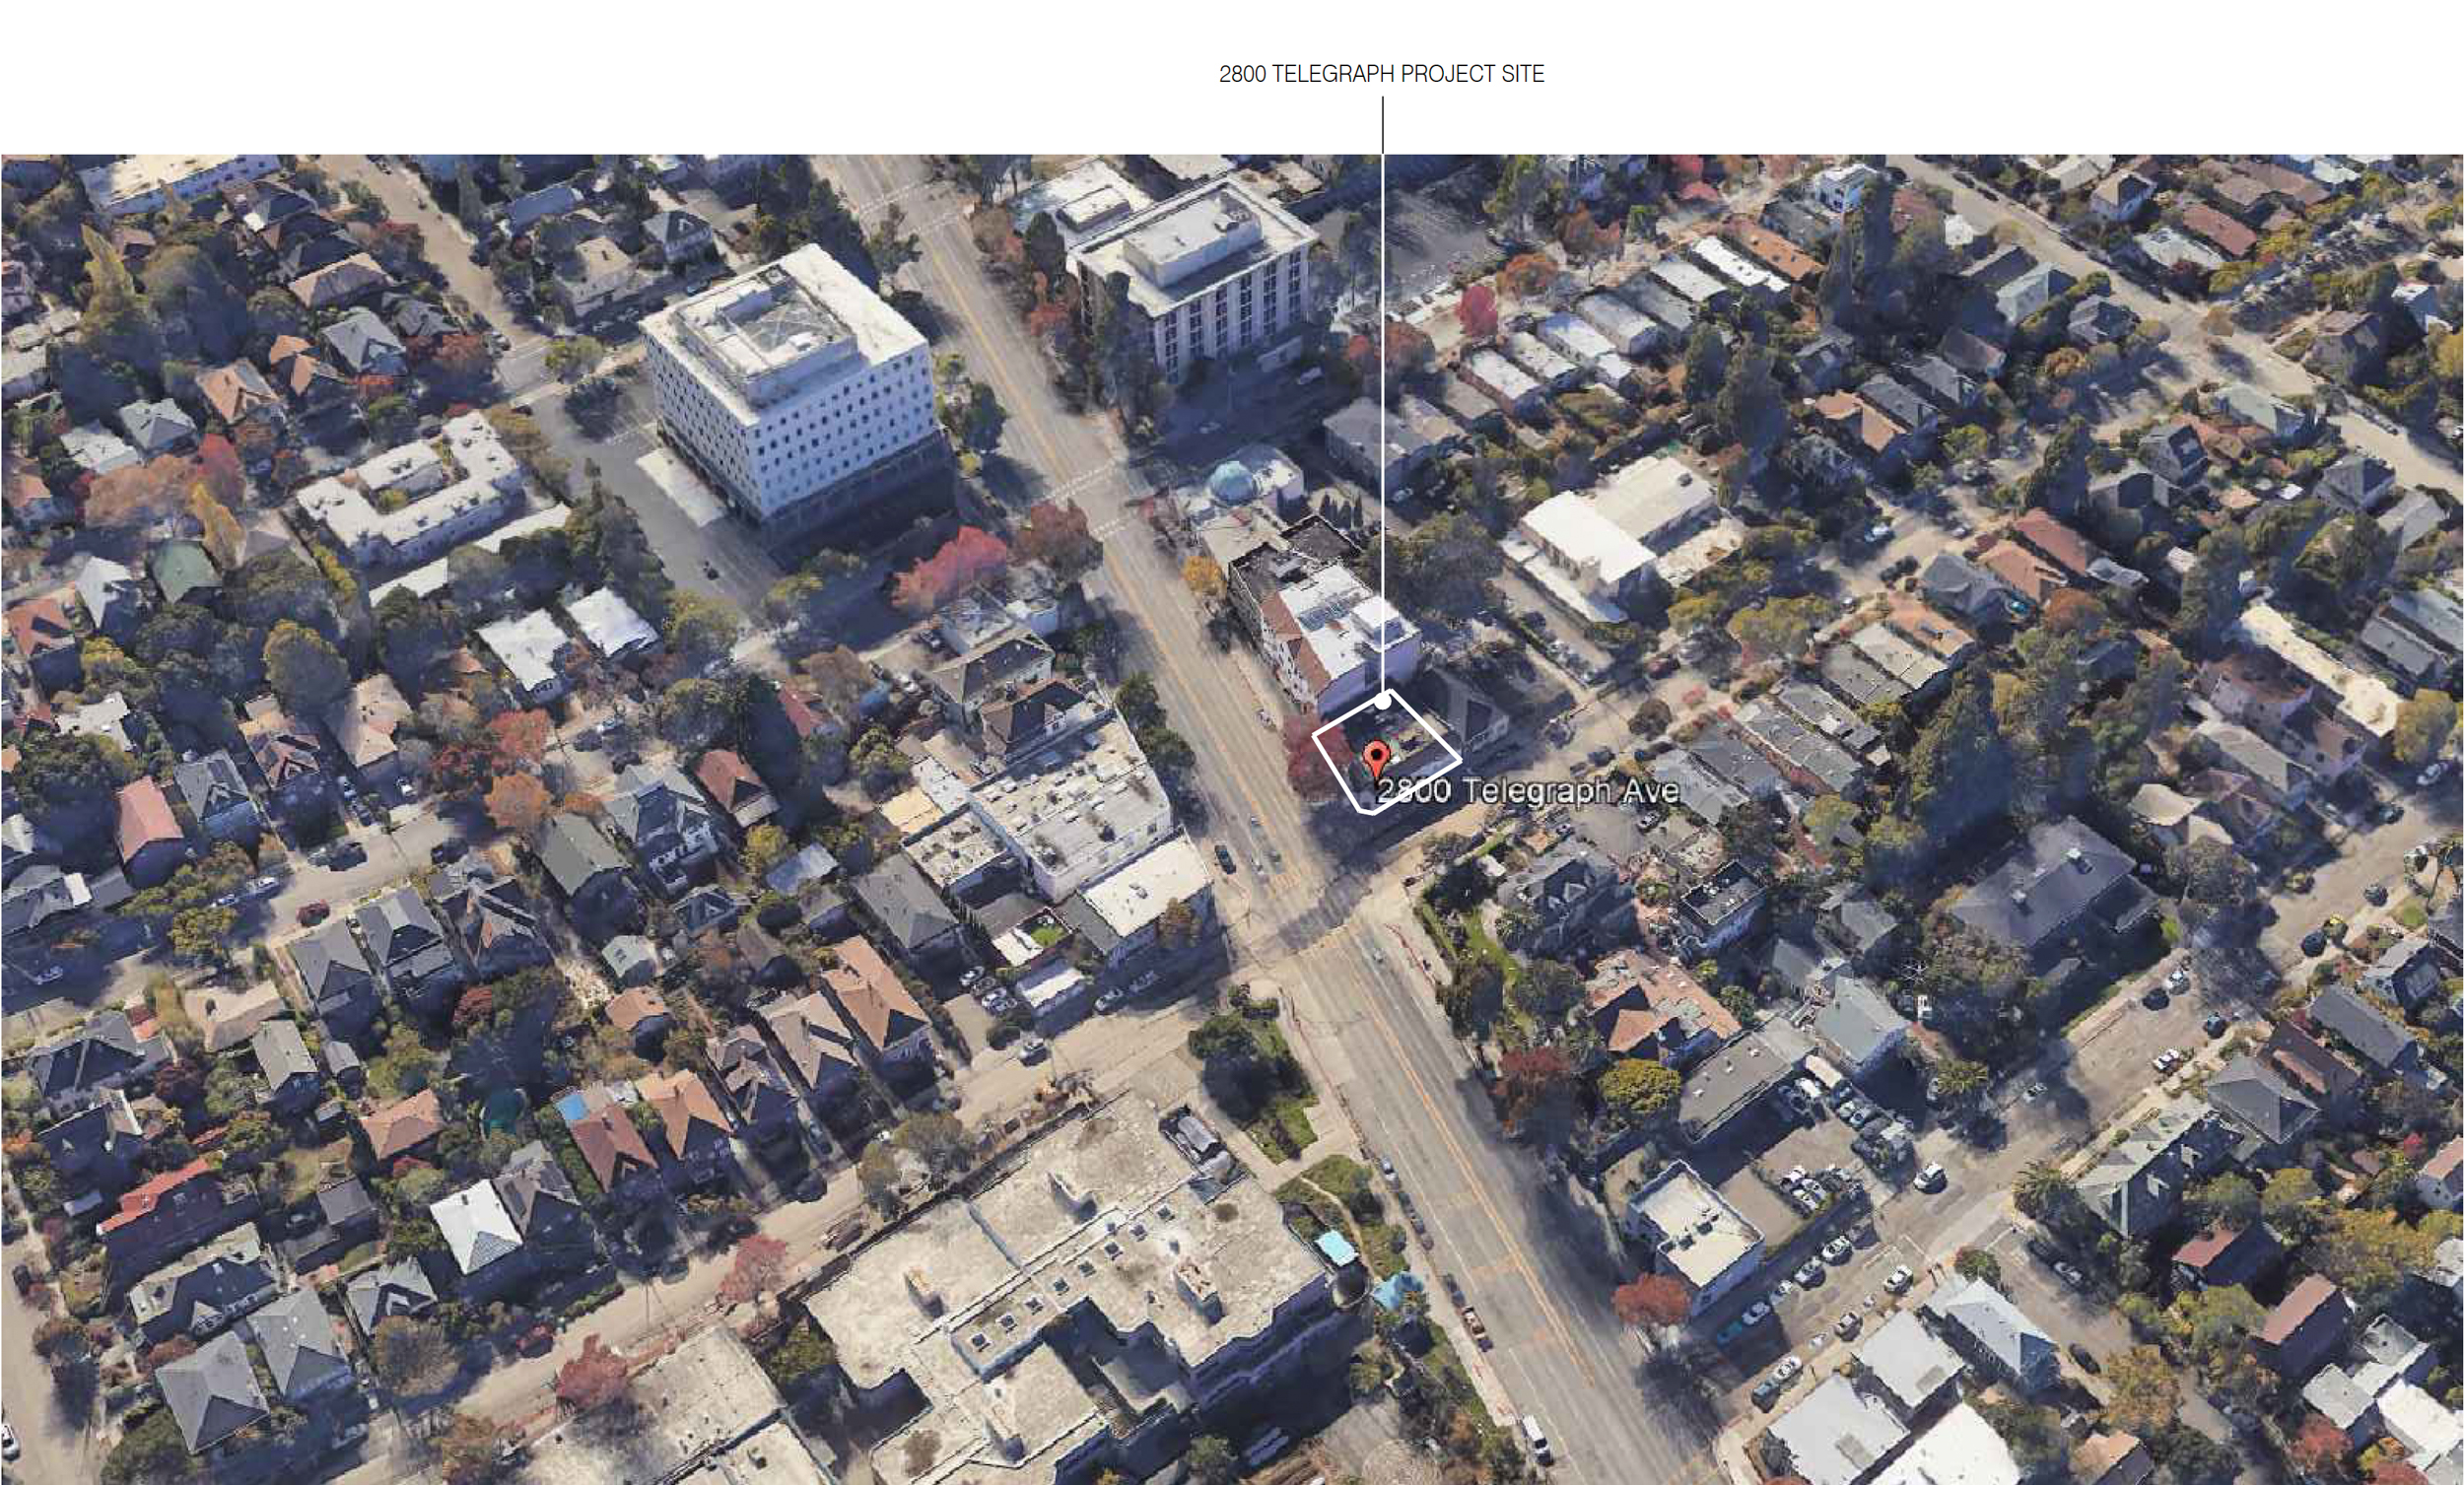 2800 Telegraph Avenue, site map outlined by Trachtenberg Architects